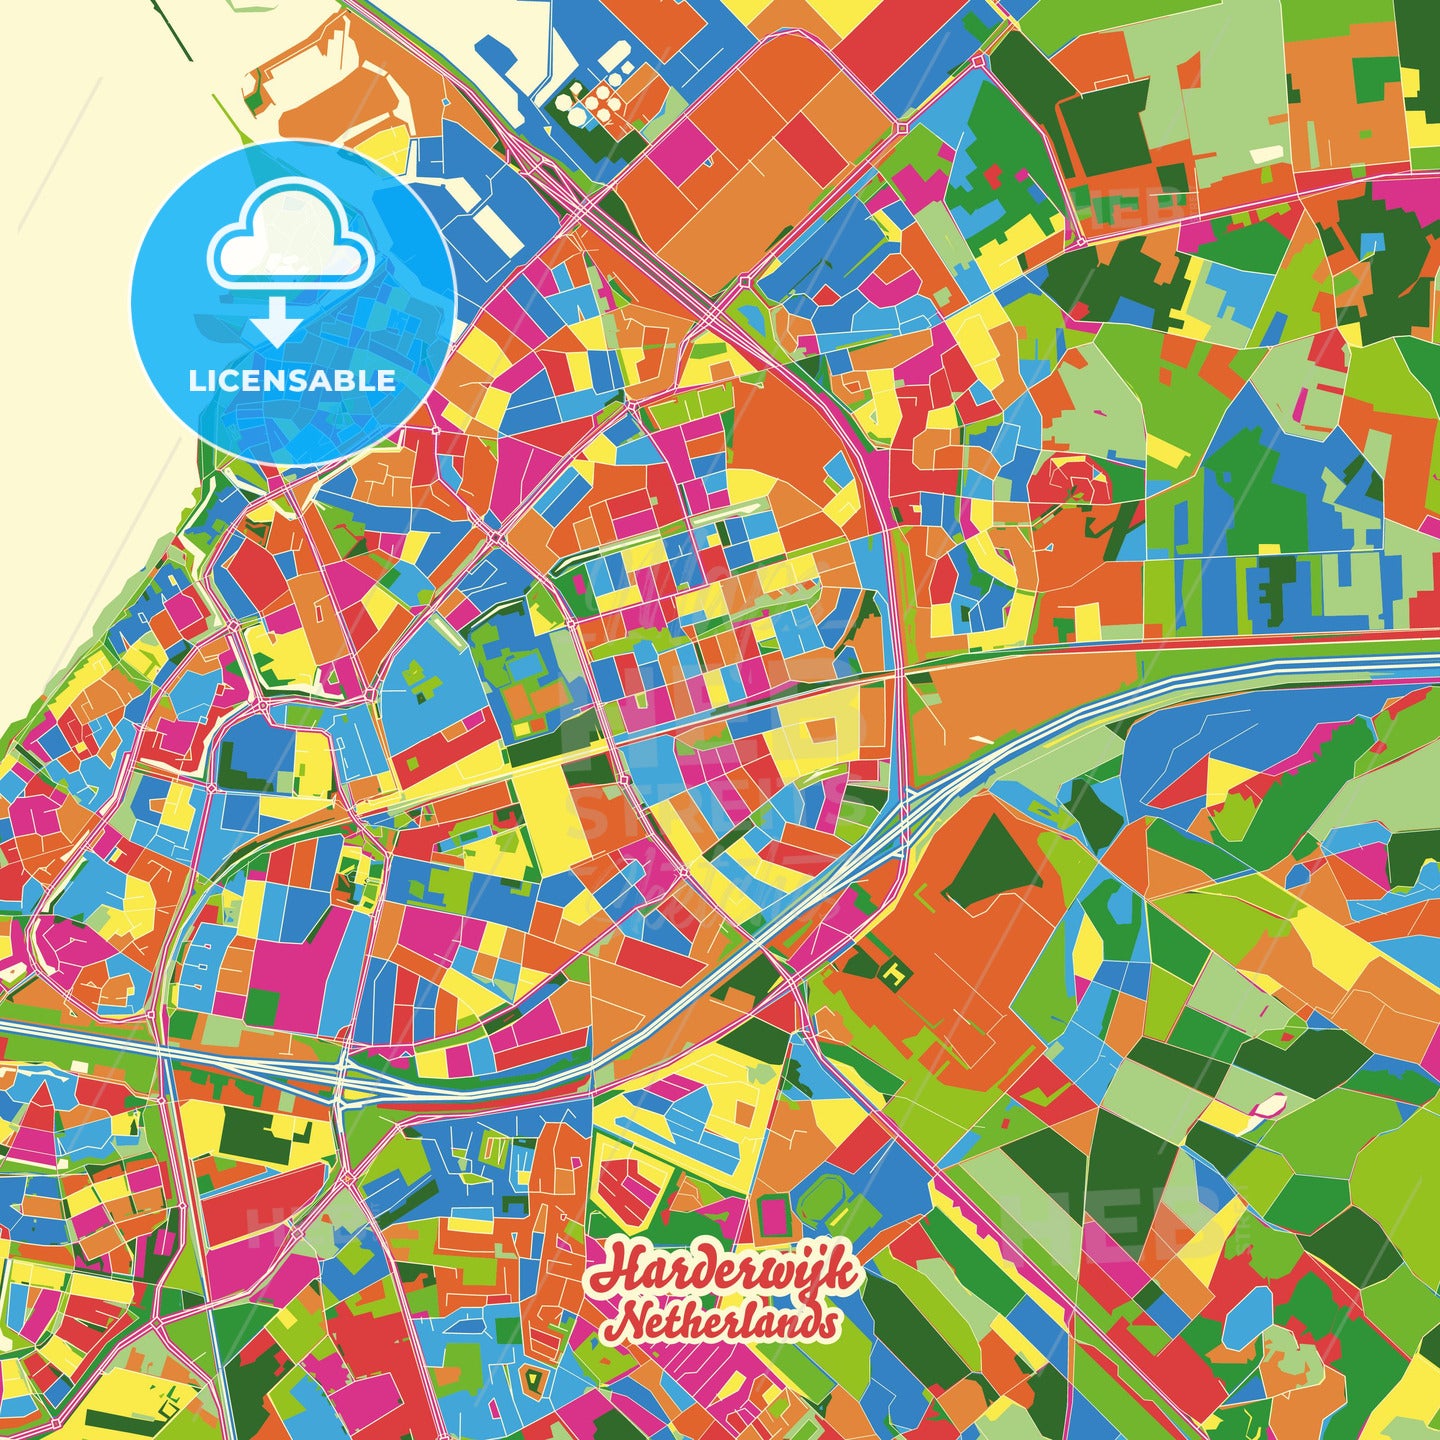 Harderwijk, Netherlands Crazy Colorful Street Map Poster Template - HEBSTREITS Sketches